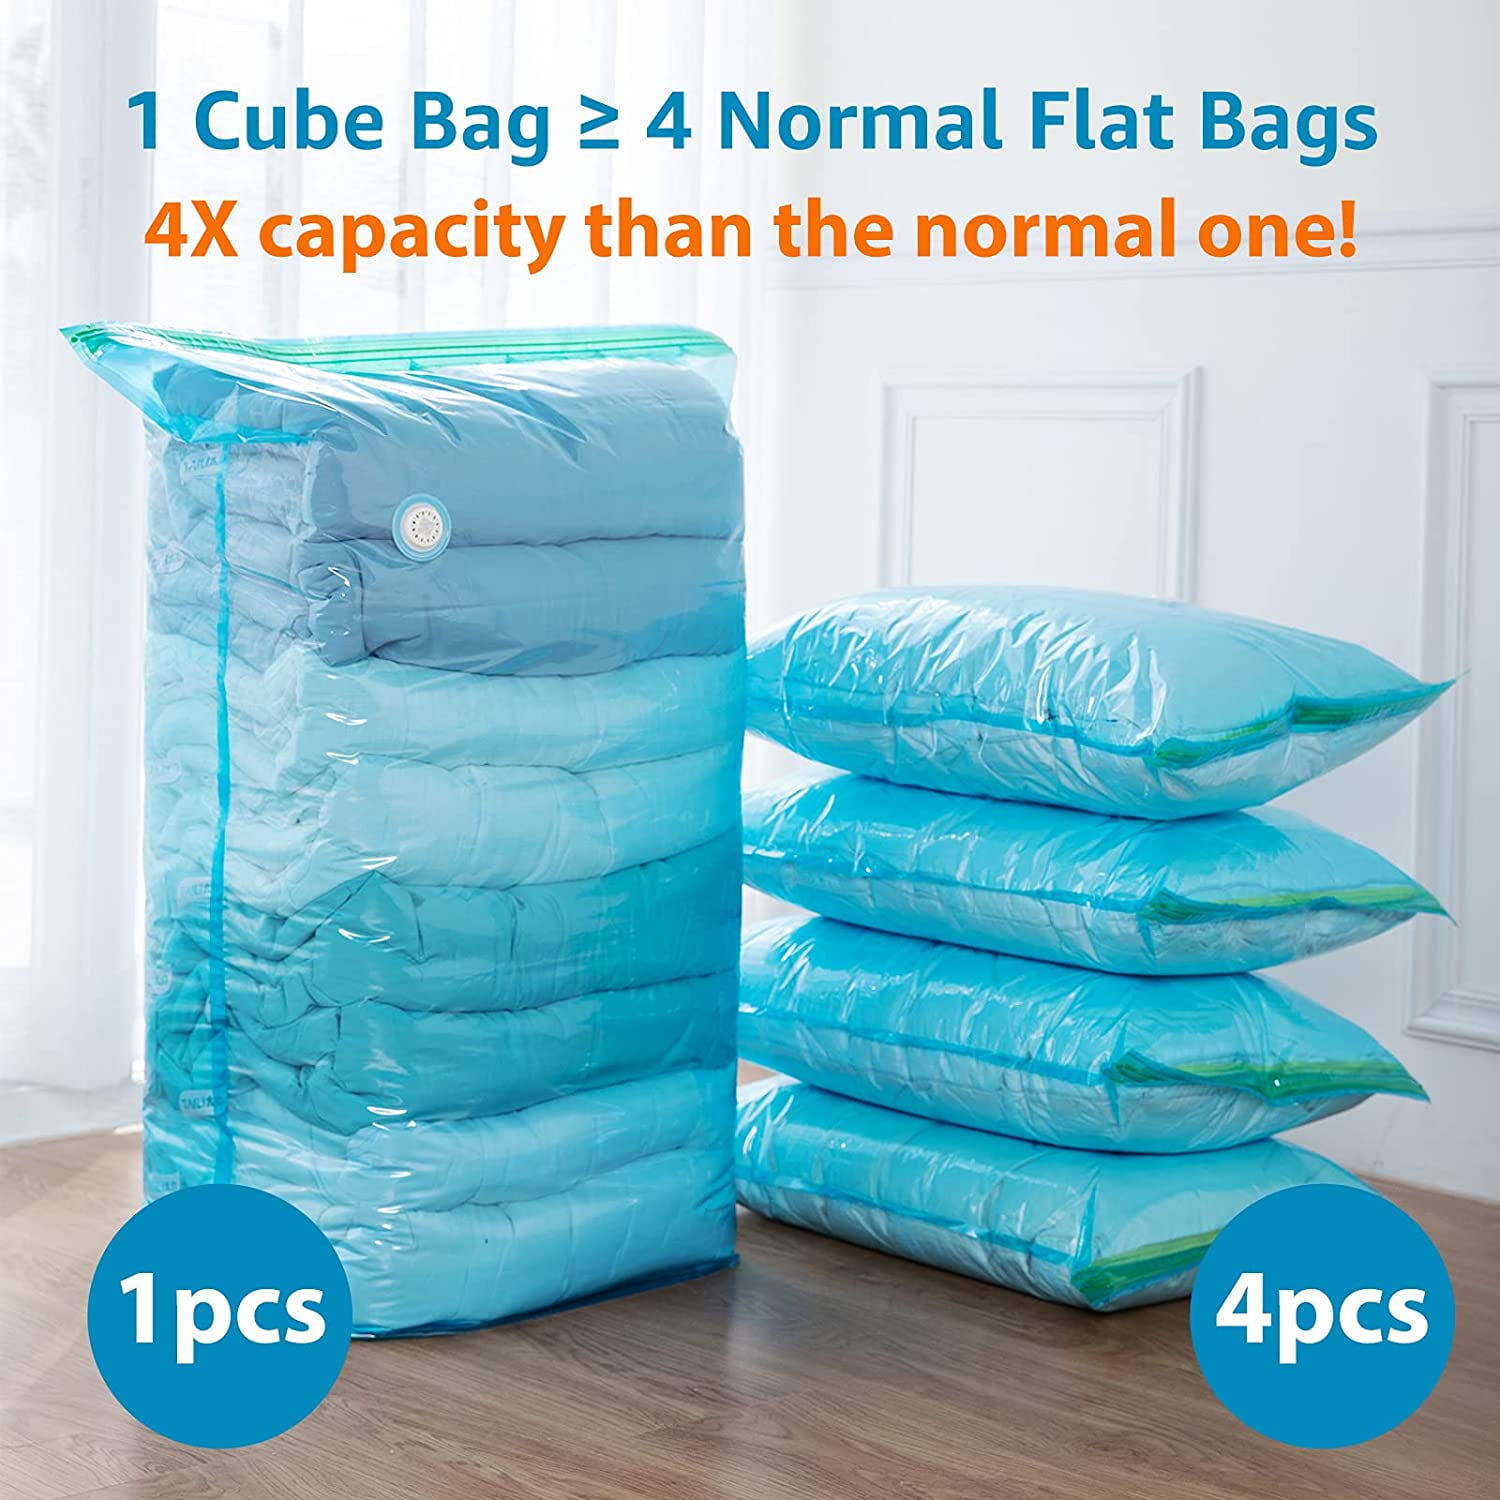 Free up 80% Space Plush Toys Beddings Quilts Comforters Compress By Sitting Pillows Vacuum Seal Bags for Clothes TAILI Vacuum Storage Space Saver Bags Cube 4 Jumbo Pack